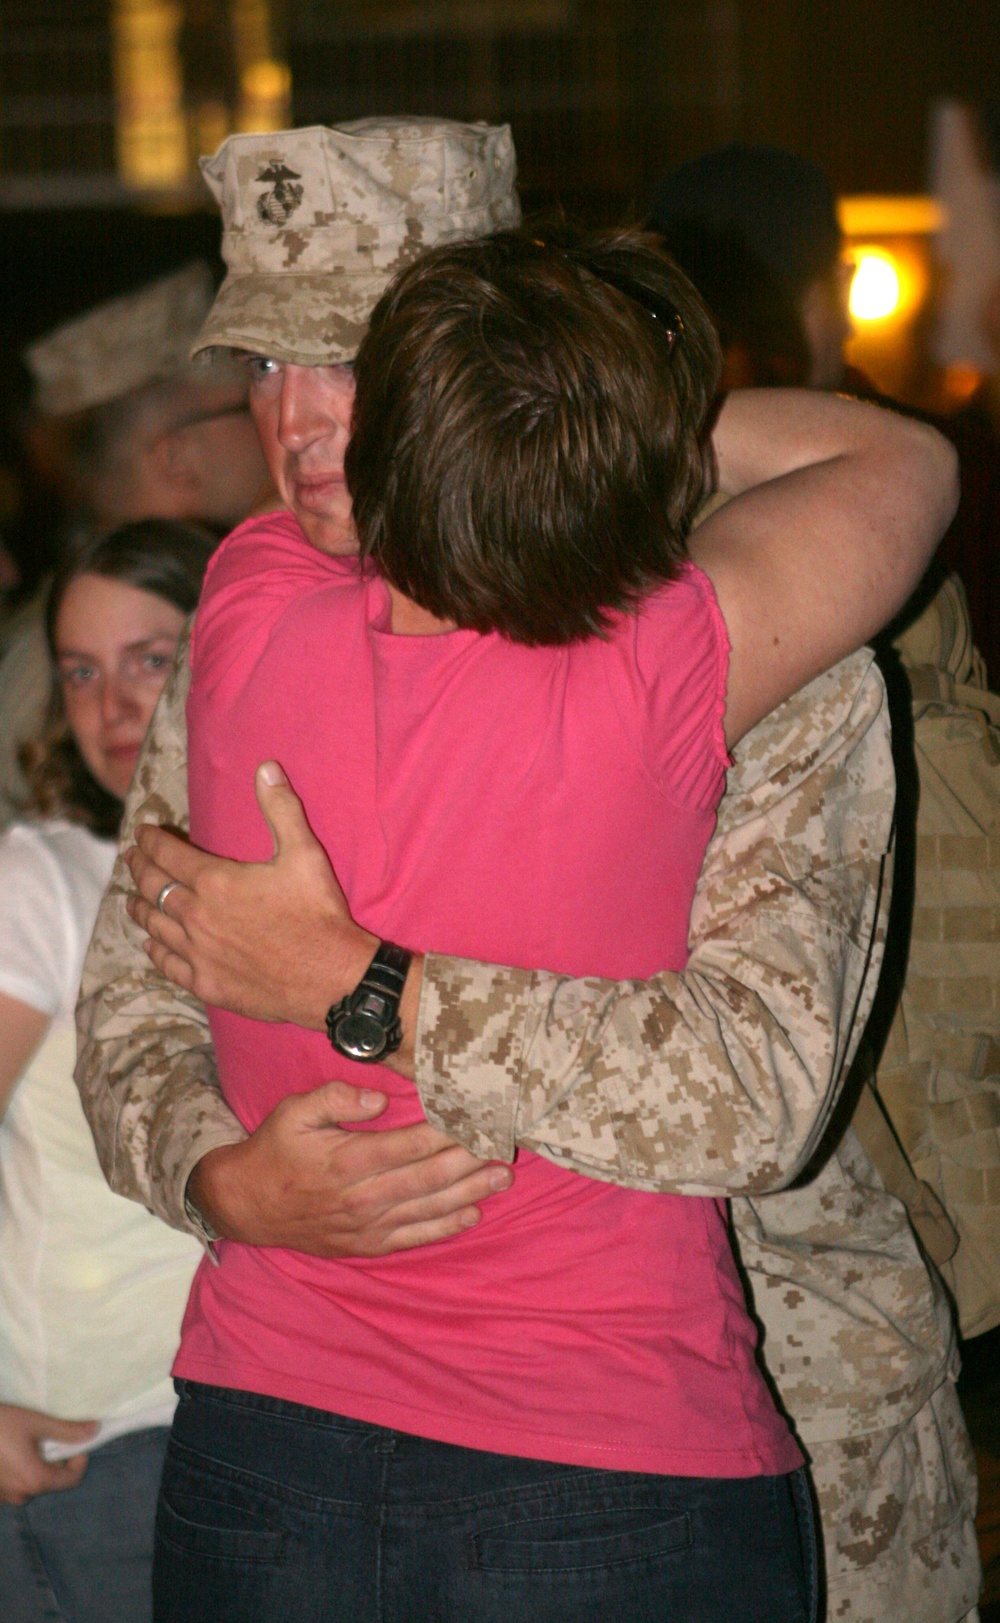 3/8 Welcomed Home From Afghanistan